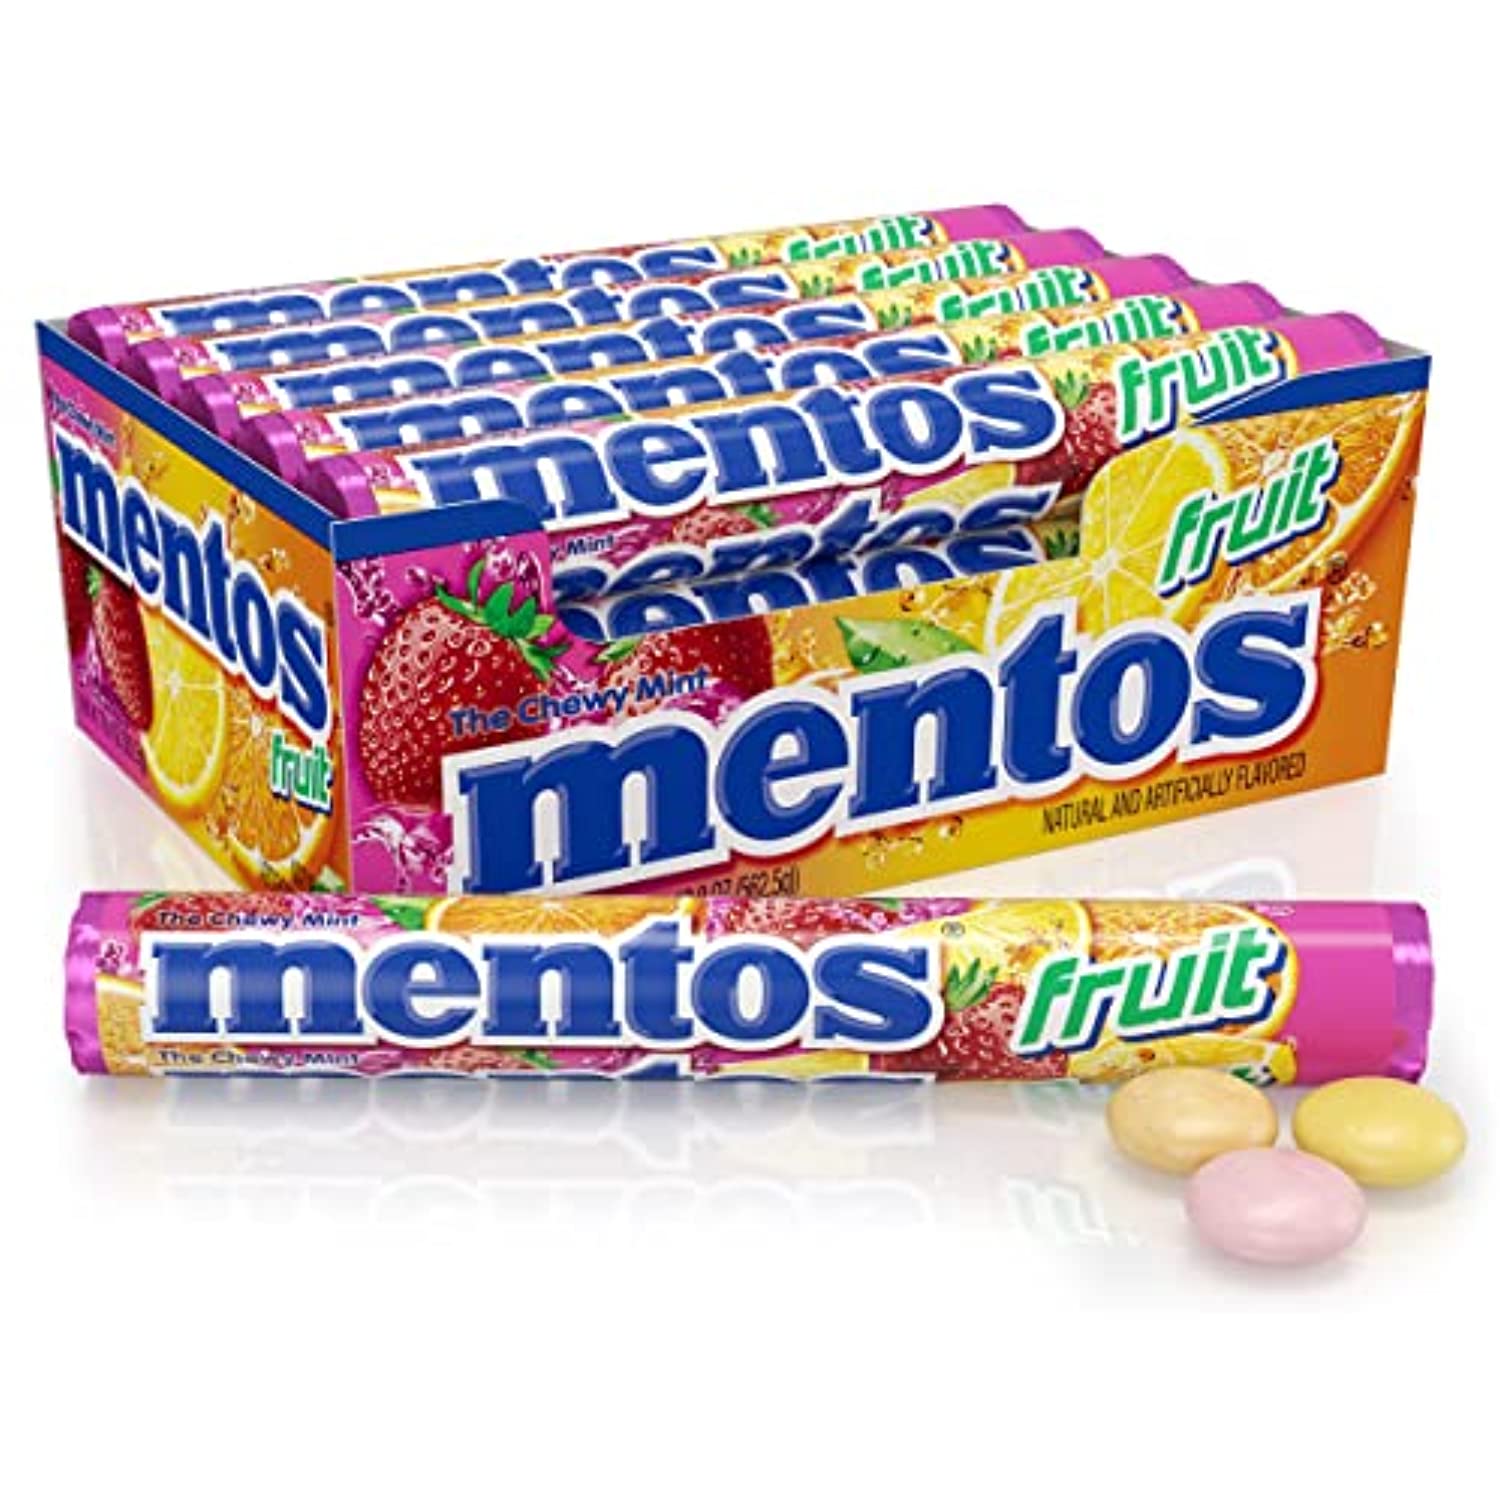 Mentos Candy,Easter, Mint Chewy Candy Roll, Fruit, Non Melting, Holiday, Party, Concessions, Office, 14 Pieces (Bulk Pack Of 15) - Packaging May Vary - image 1 of 3